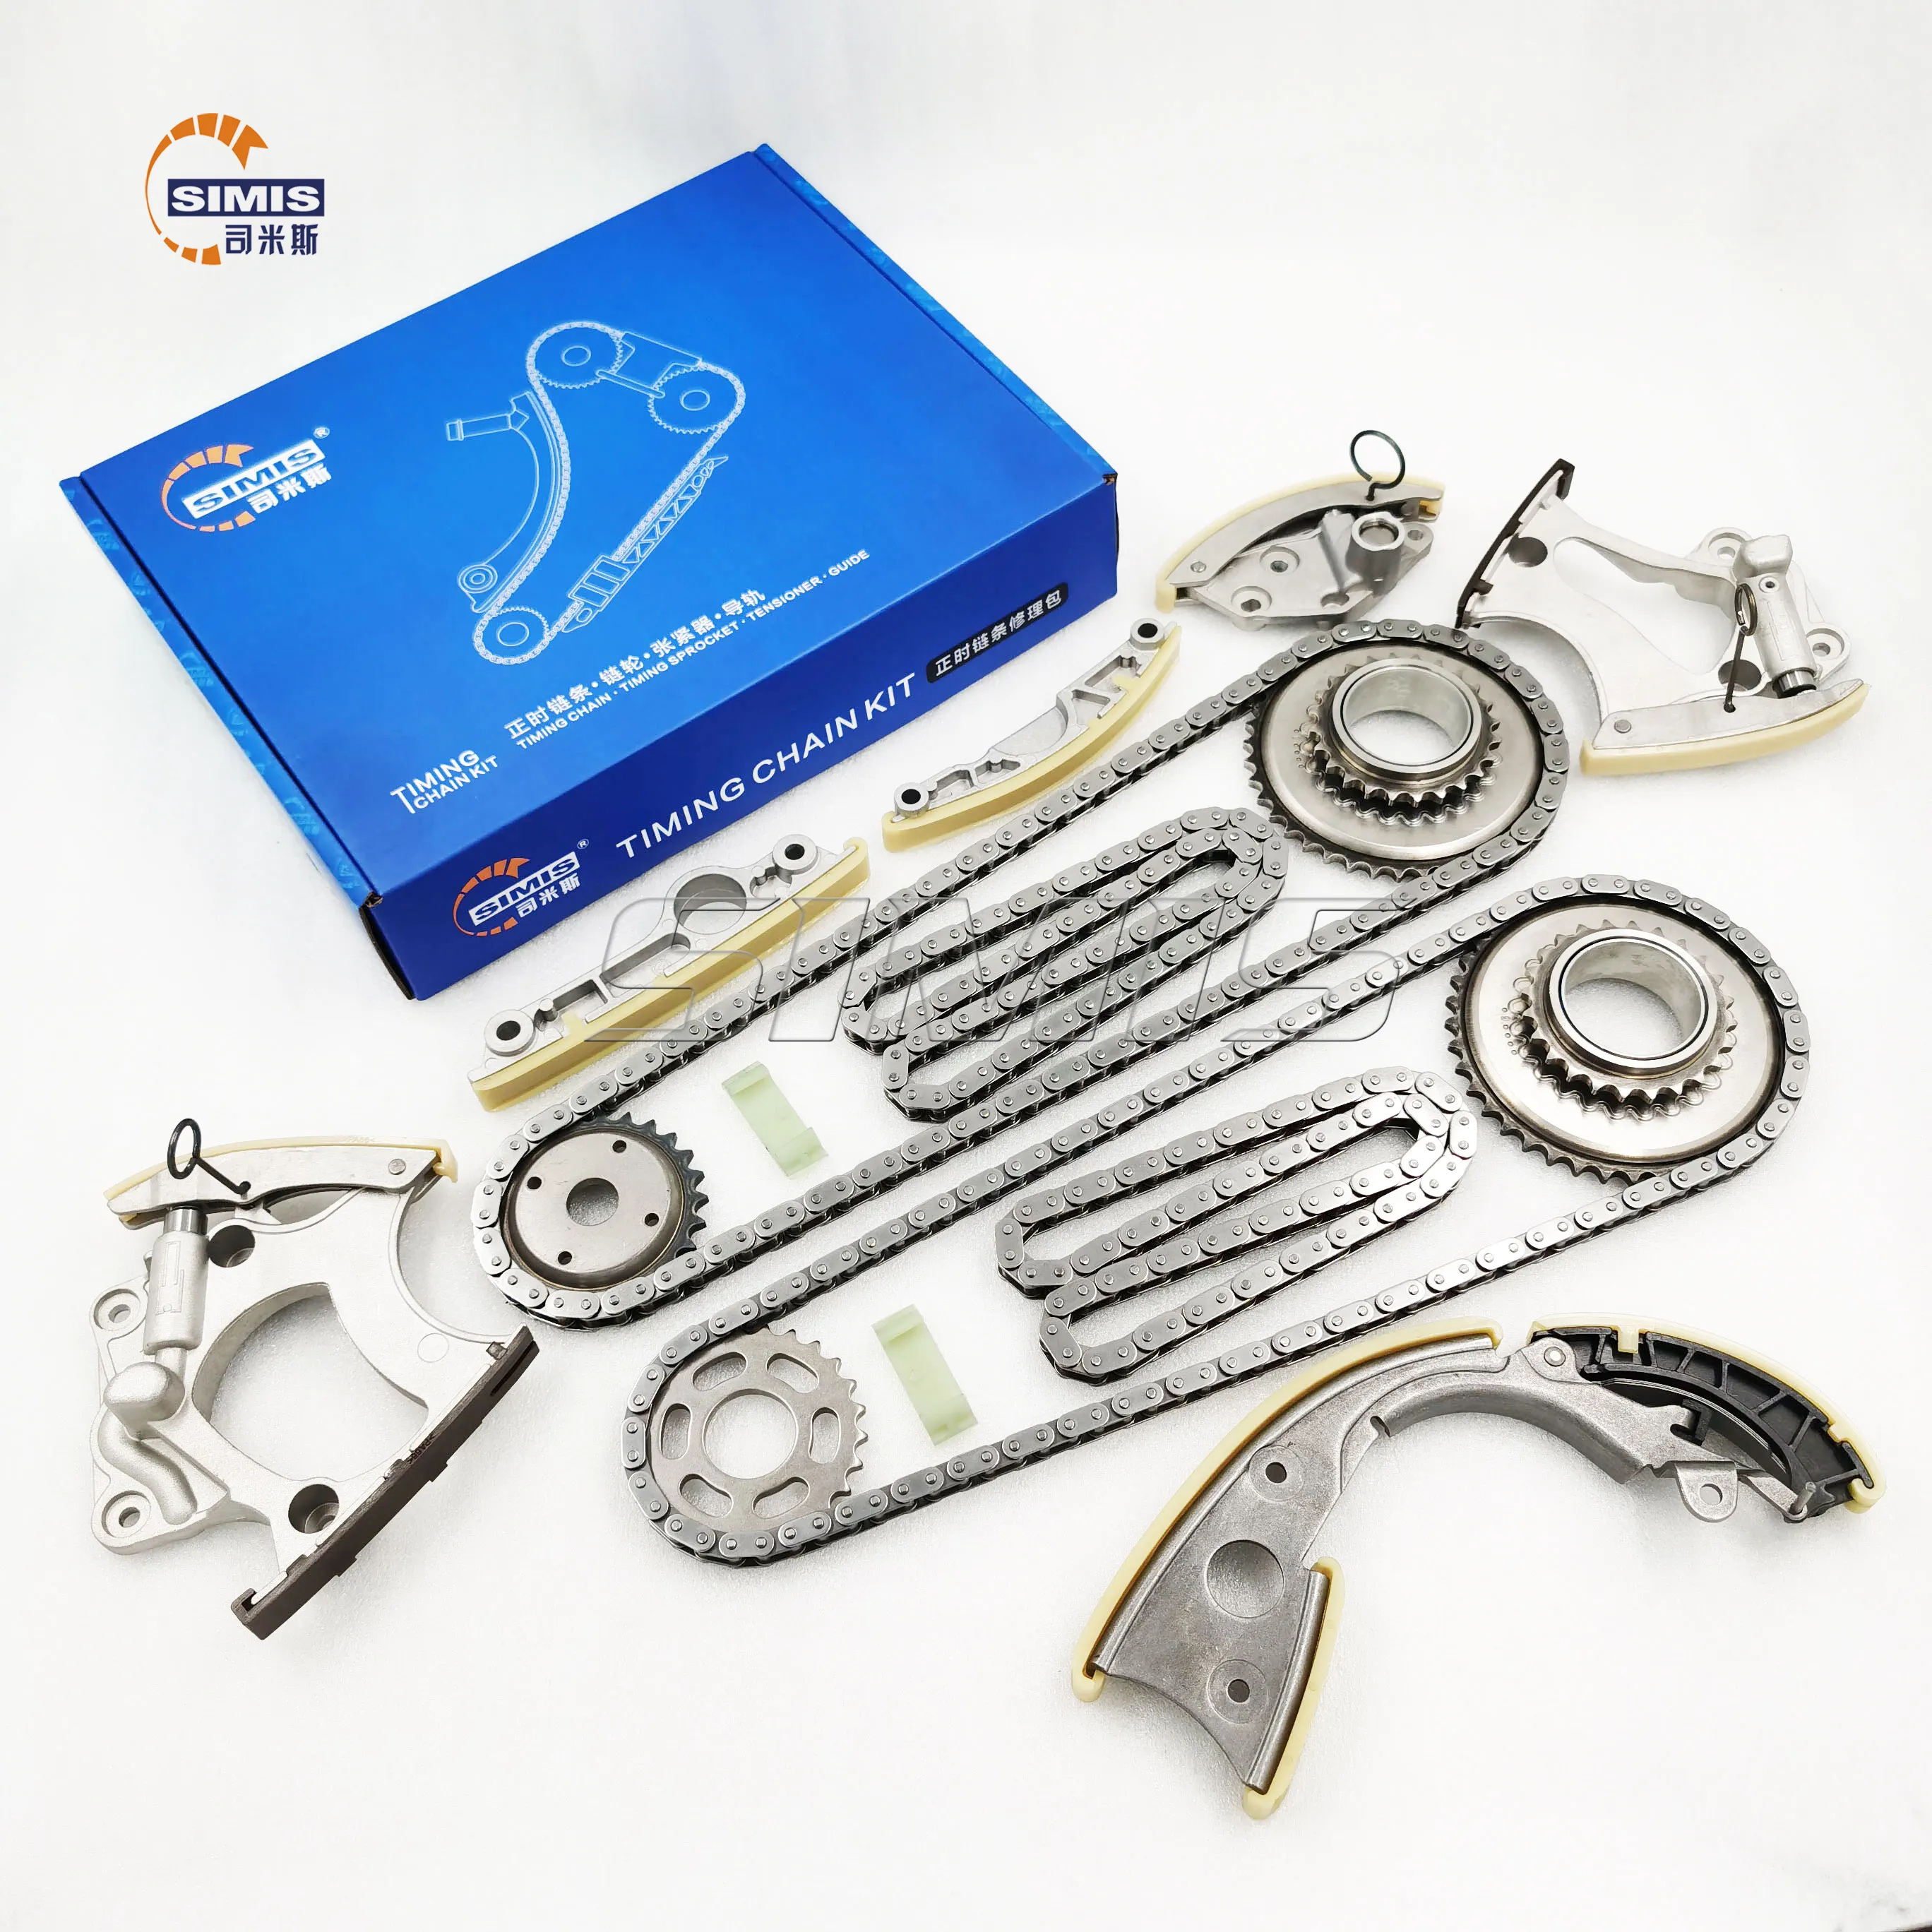 SIMIS PARTS Used For Audi A6 Q7 A8 Quattro 3.0T Timing Chain Kit